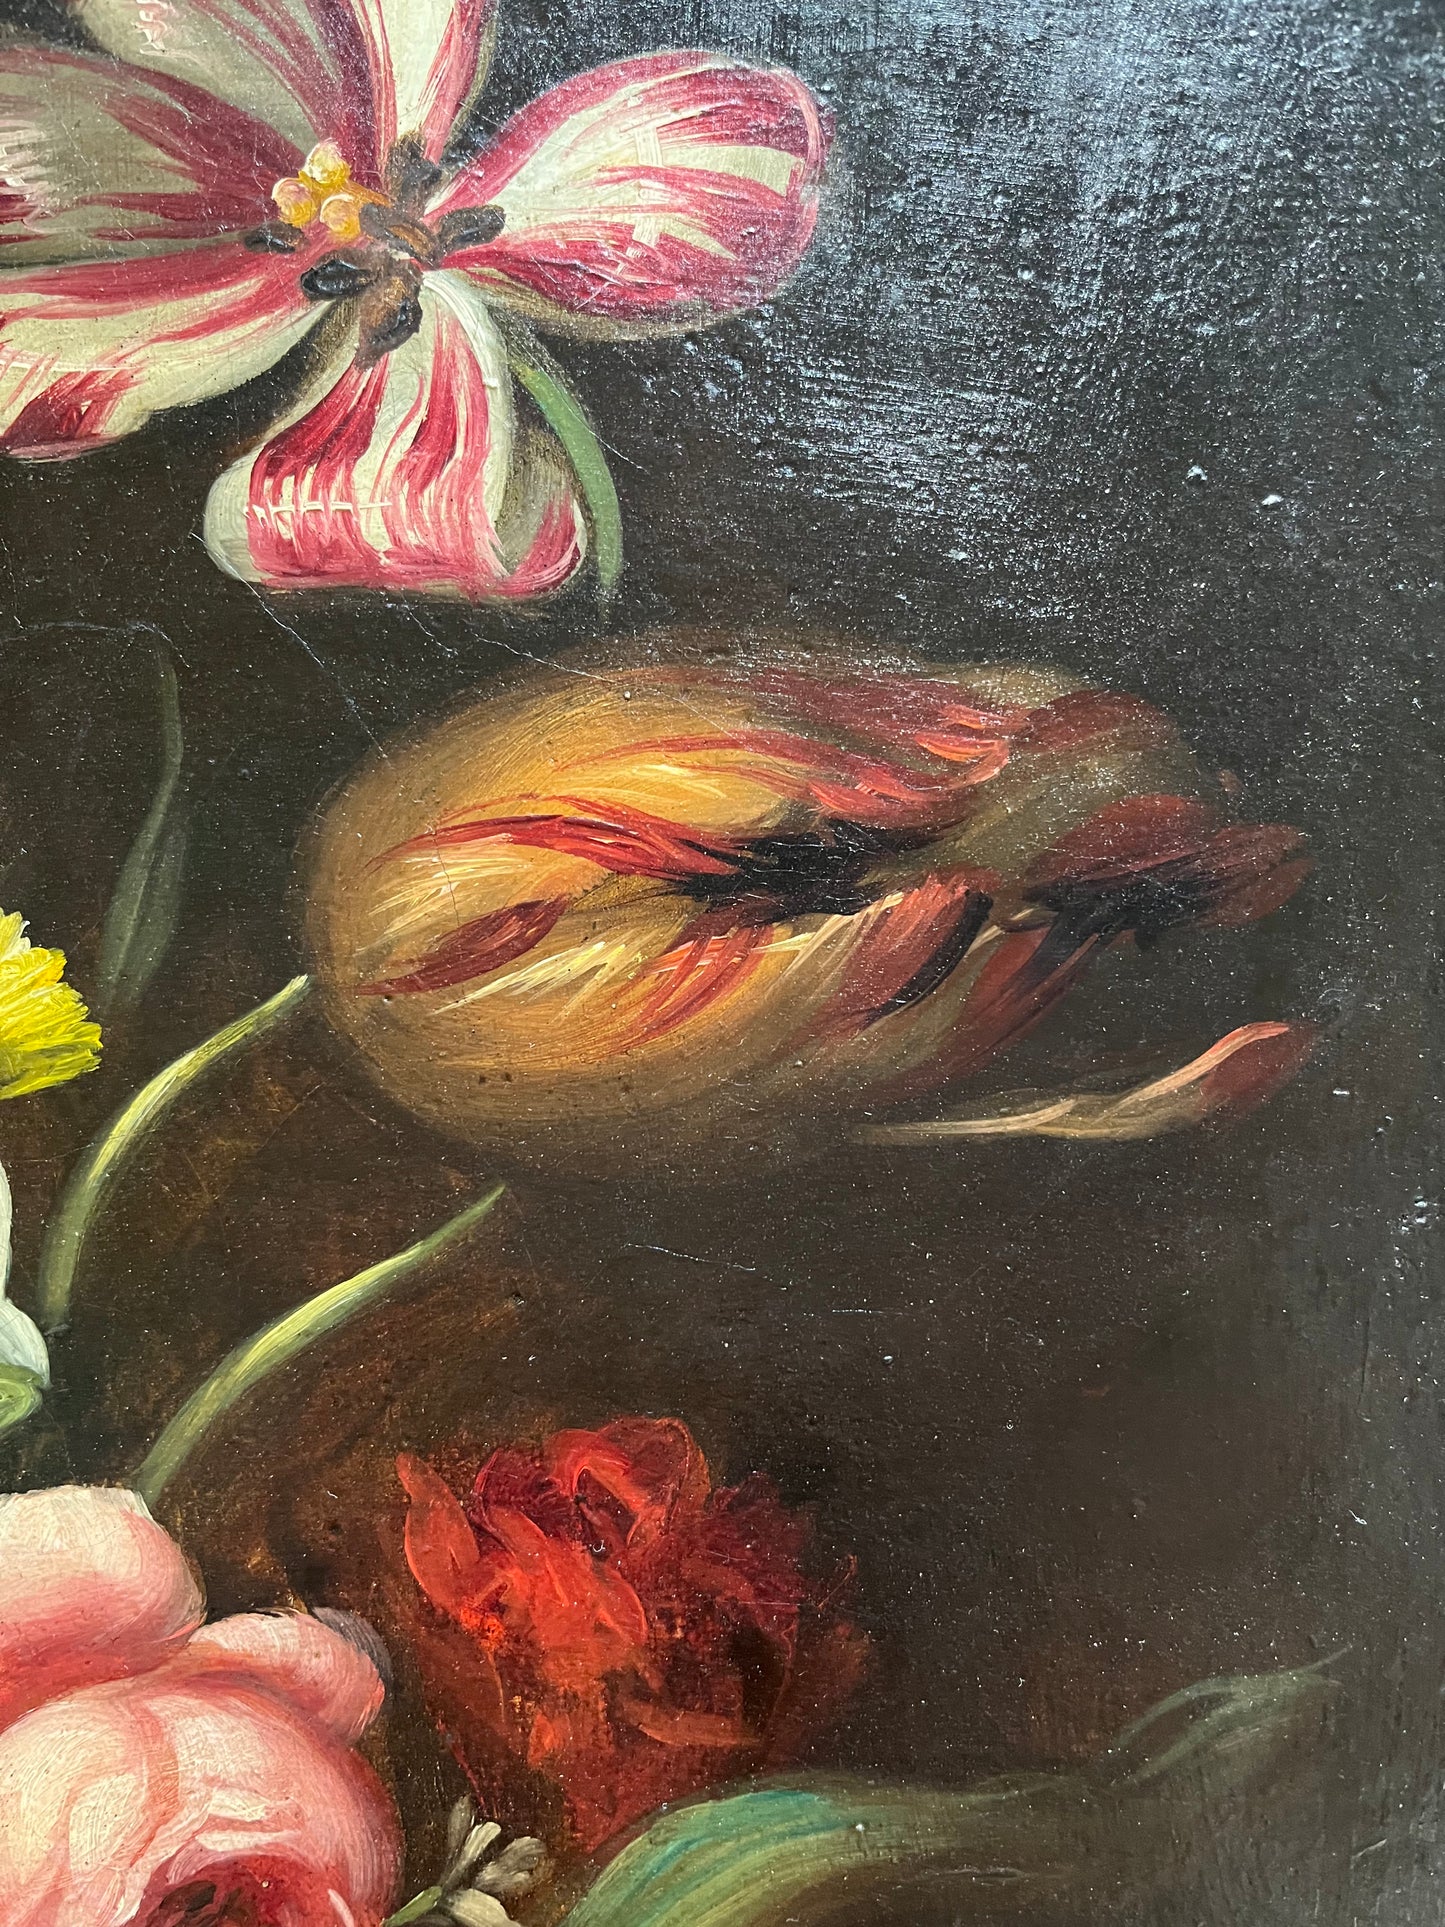 Antique floral still life of flowers